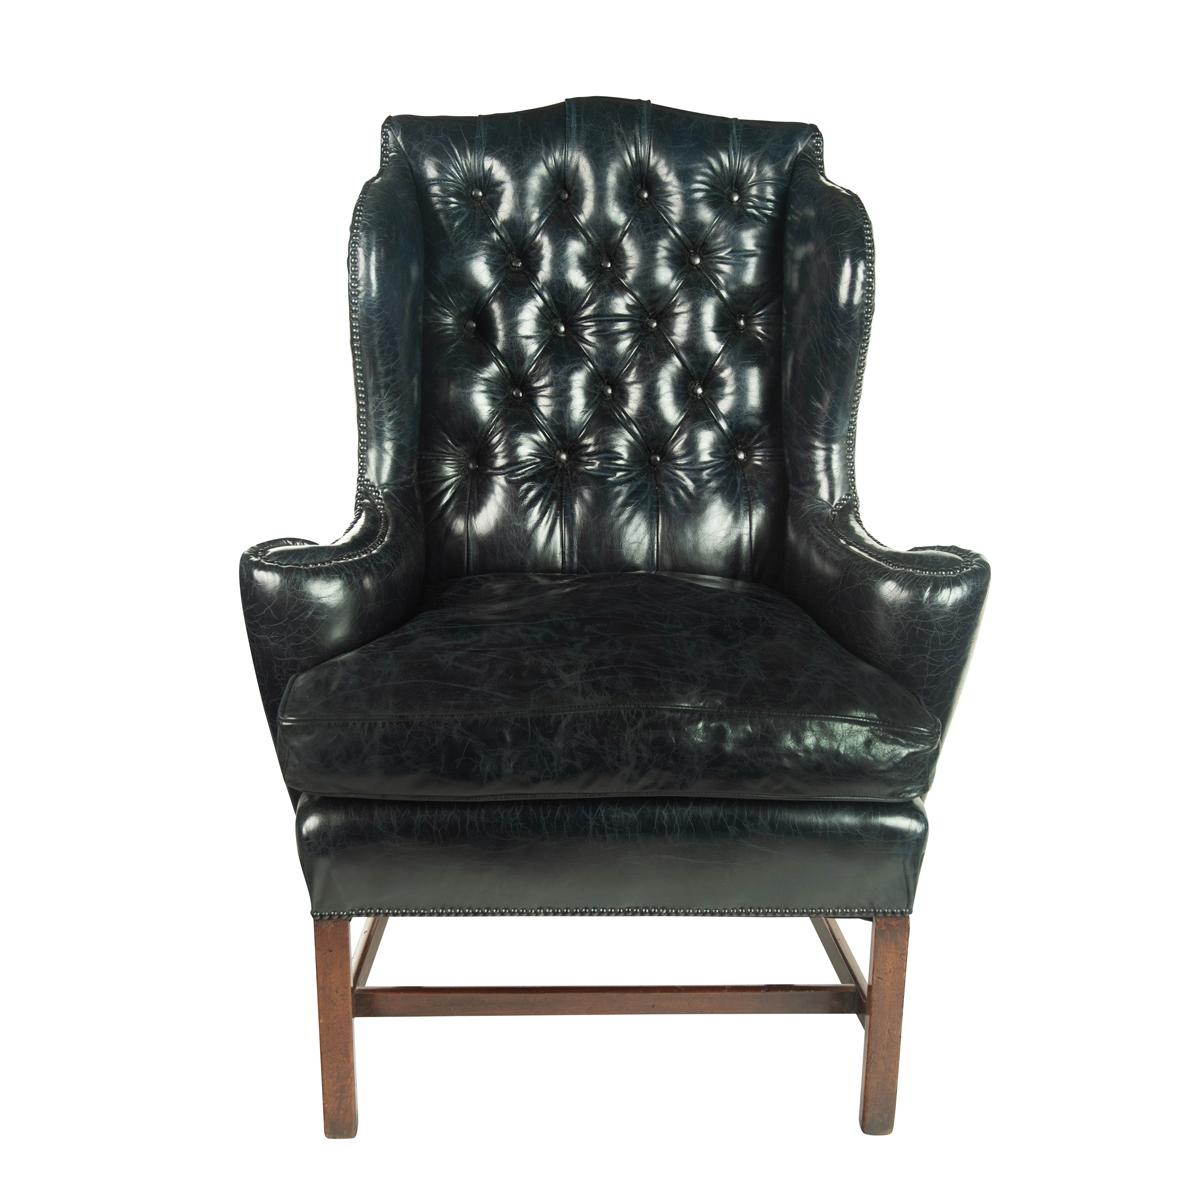 A generous George III wing arm chair, the shaped deep-buttoned back with scrolling arms, reupholstered in distressed blue-black leather, raised on four square section legs joined by an H shaped stretcher. English, circa 1800.
  